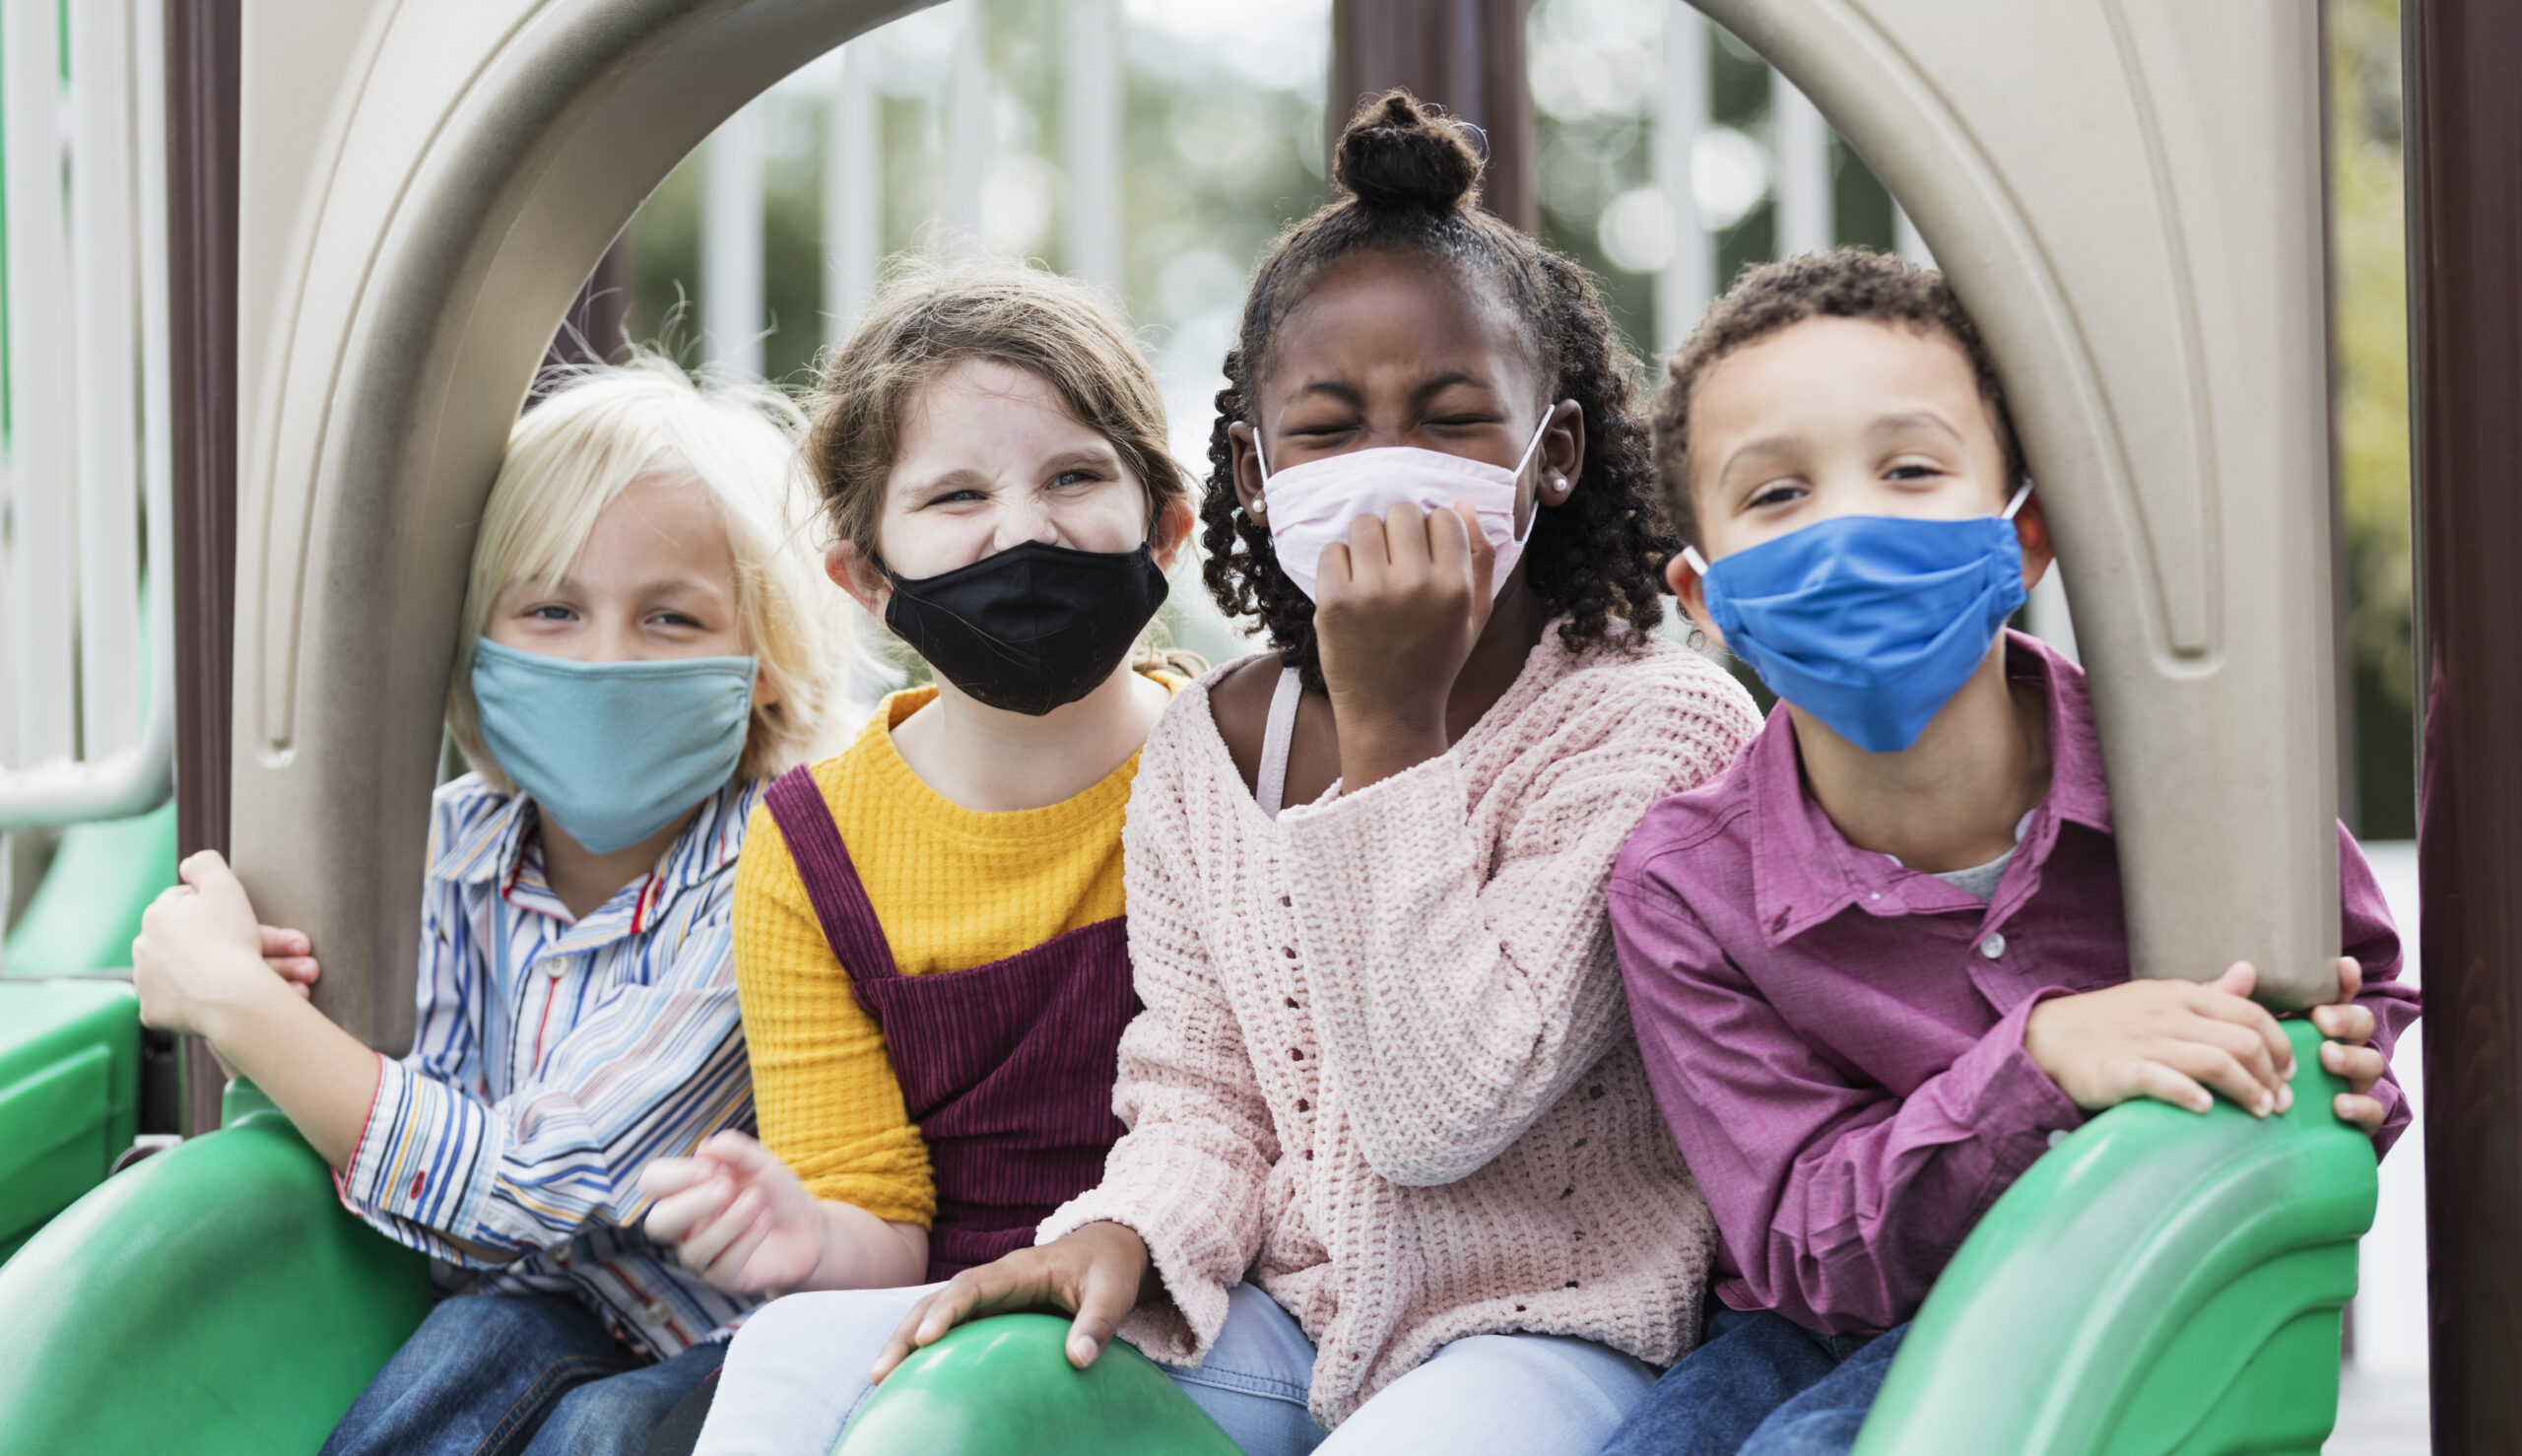 A multi-ethnic group of four children, 5 to 7 years old, playing together on a playground during school recess. They are sitting side by side on two slides, looking at the camera. They are all wearing masks, back to school during the COVID-19 pandemic, trying to prevent the spread of coronavirus.